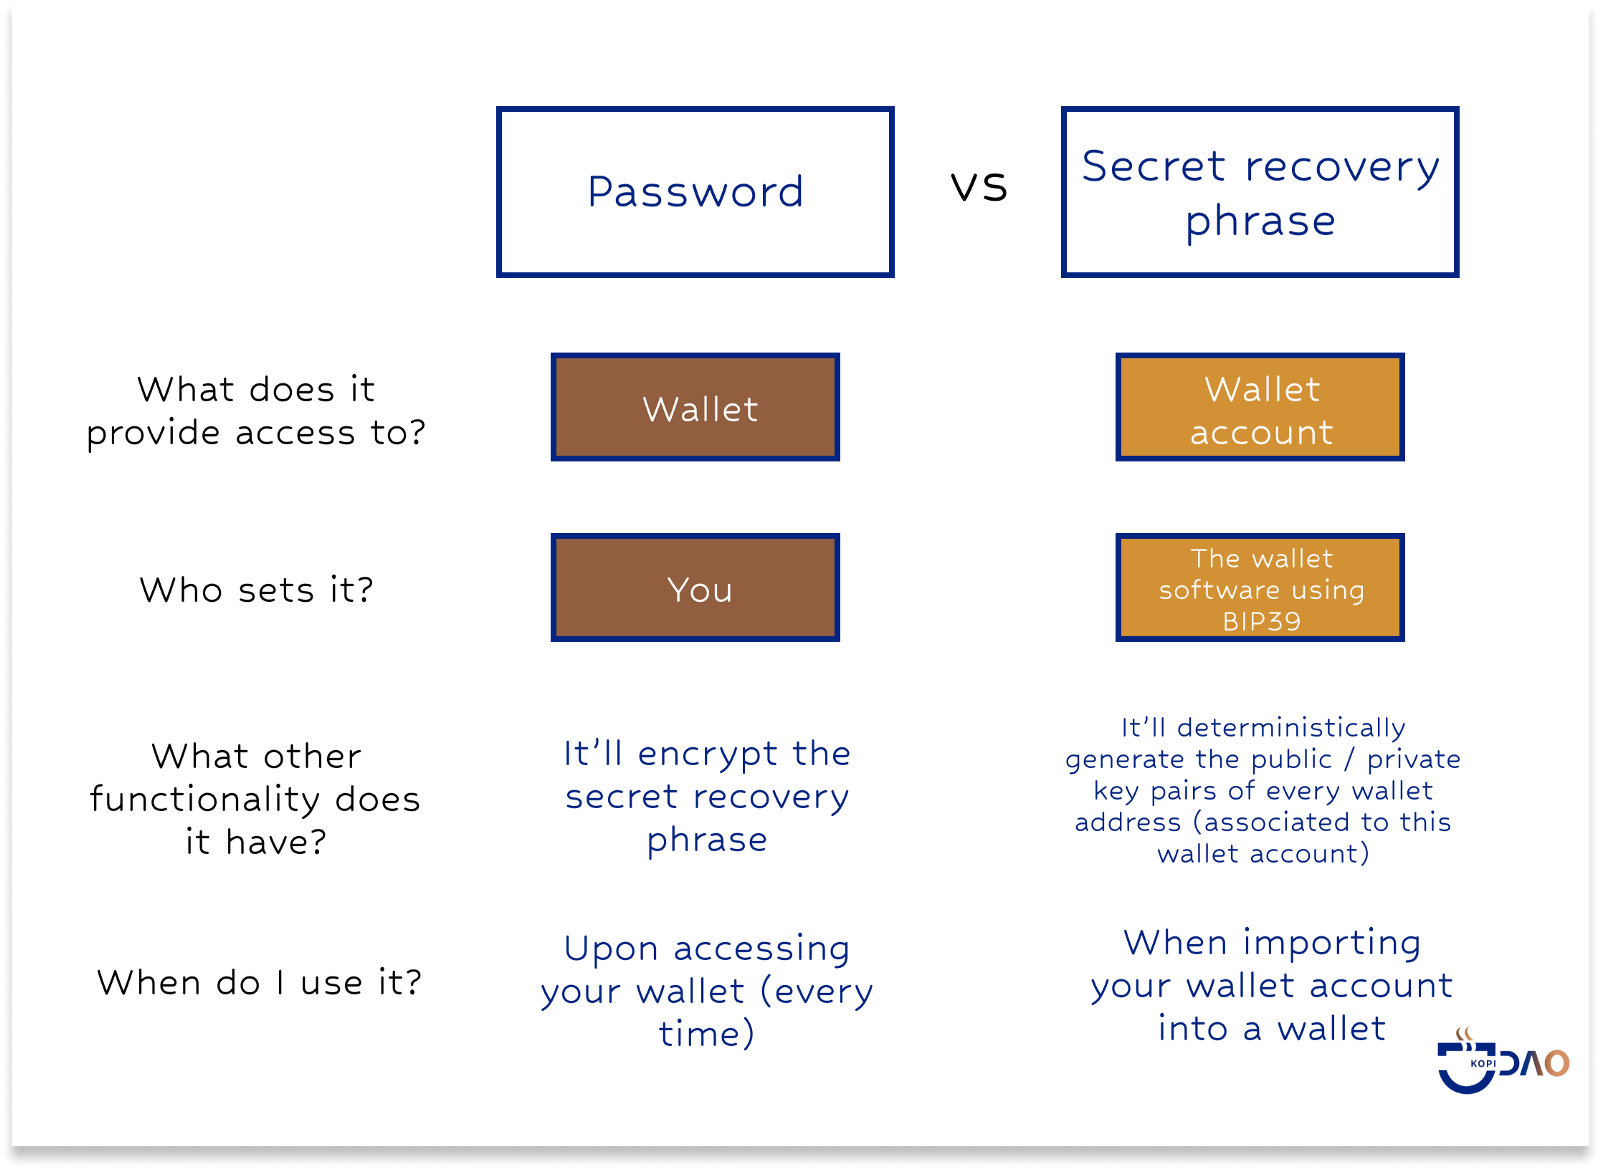 The password to your wallet is different from the secret recovery phrase associated with your wallet account. Here I compare the two.